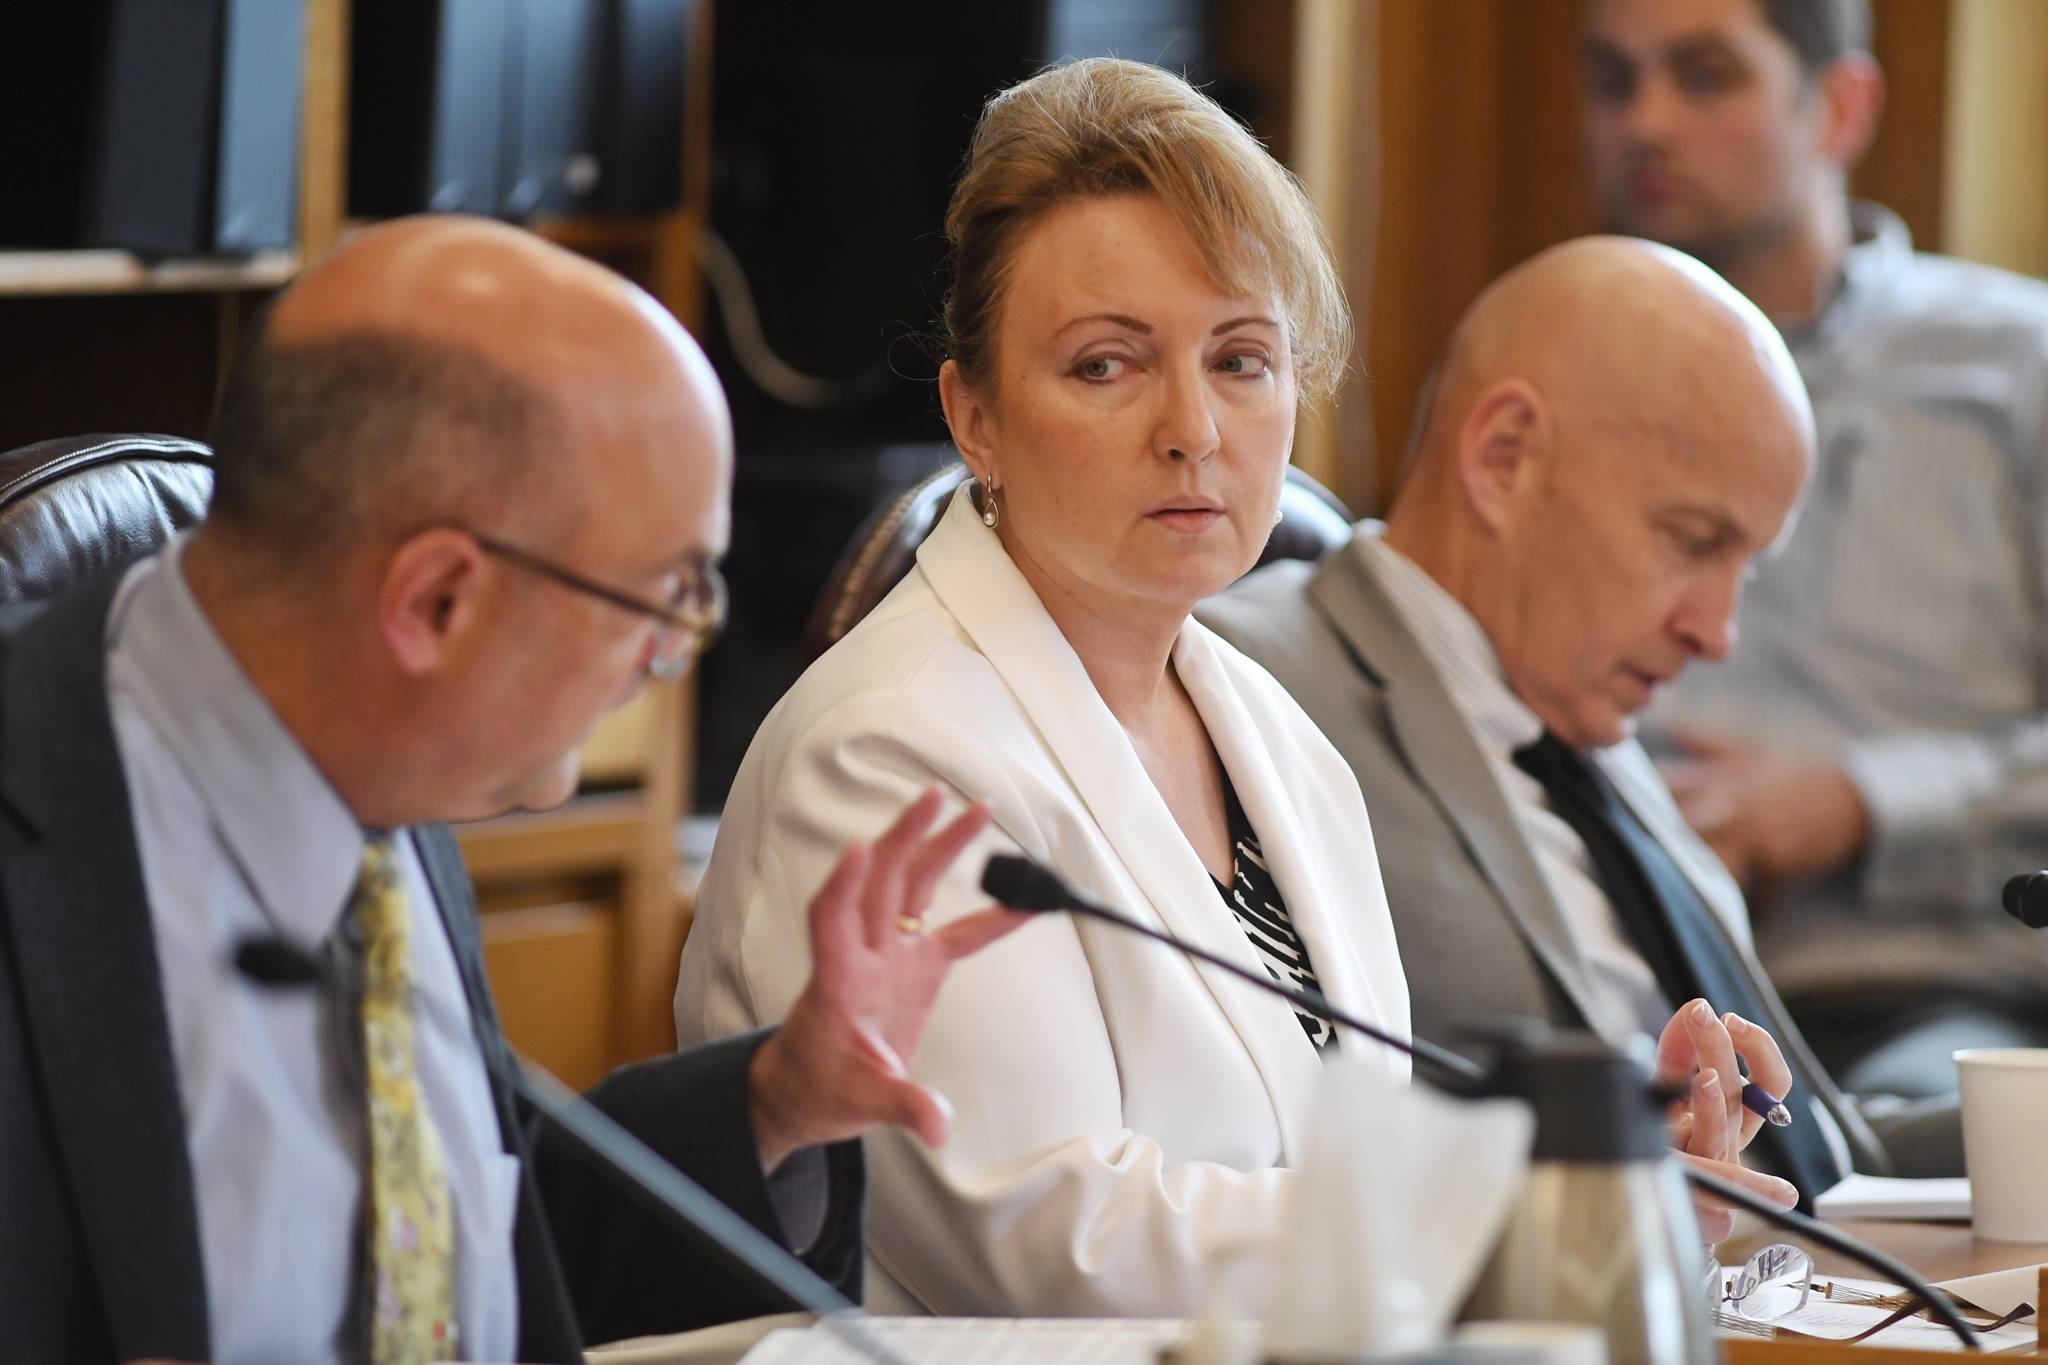 Rep. Colleen Sullivan-Leonard, R-Wasilla, center, and Rep Dan Ortiz, I-Ketchikan, right, listen to Rep. Andy Josephson, D-Anchorage, ask a question to the update to the capital budget bill during a House Finance Committee meeting at the Capitol on Tuesday, June 11, 2019. The bill passed out of committee. (Michael Penn | Juneau Empire)